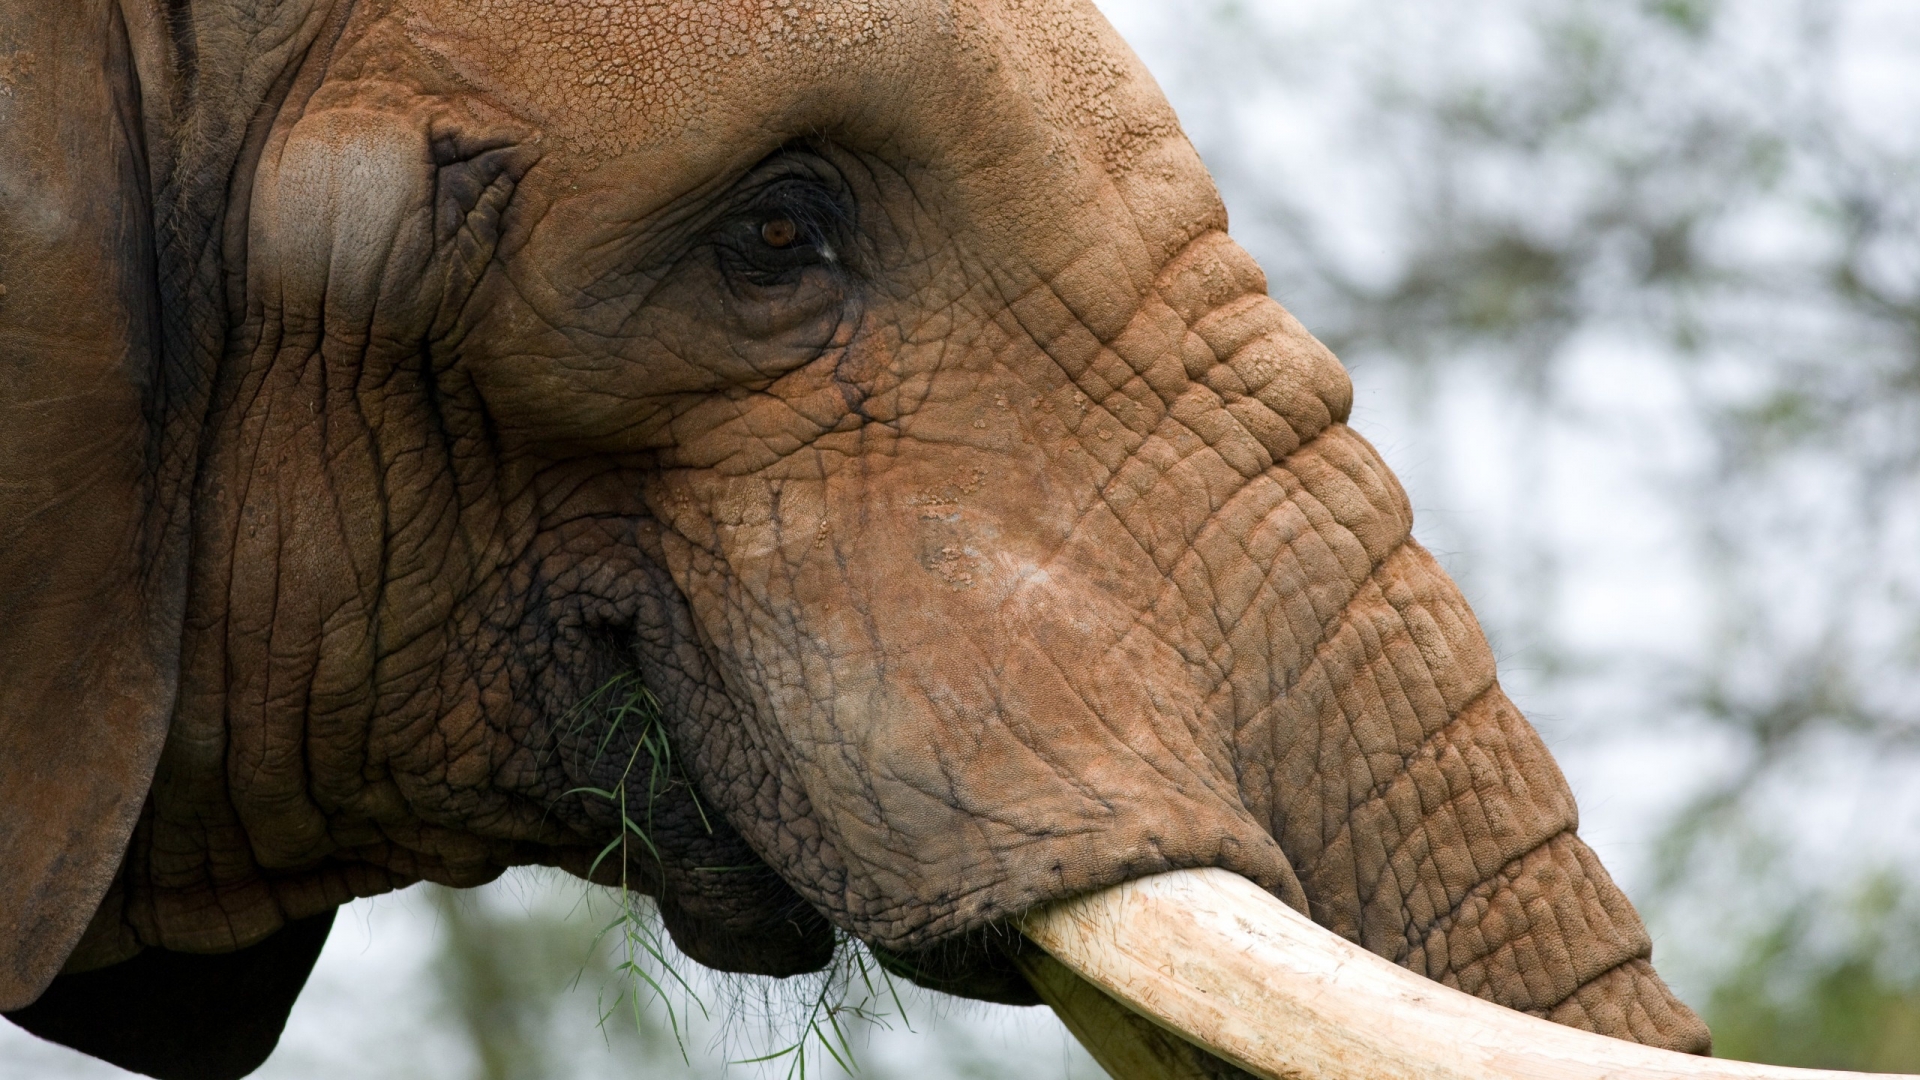 Portrait of an Elephant for 1920 x 1080 HDTV 1080p resolution